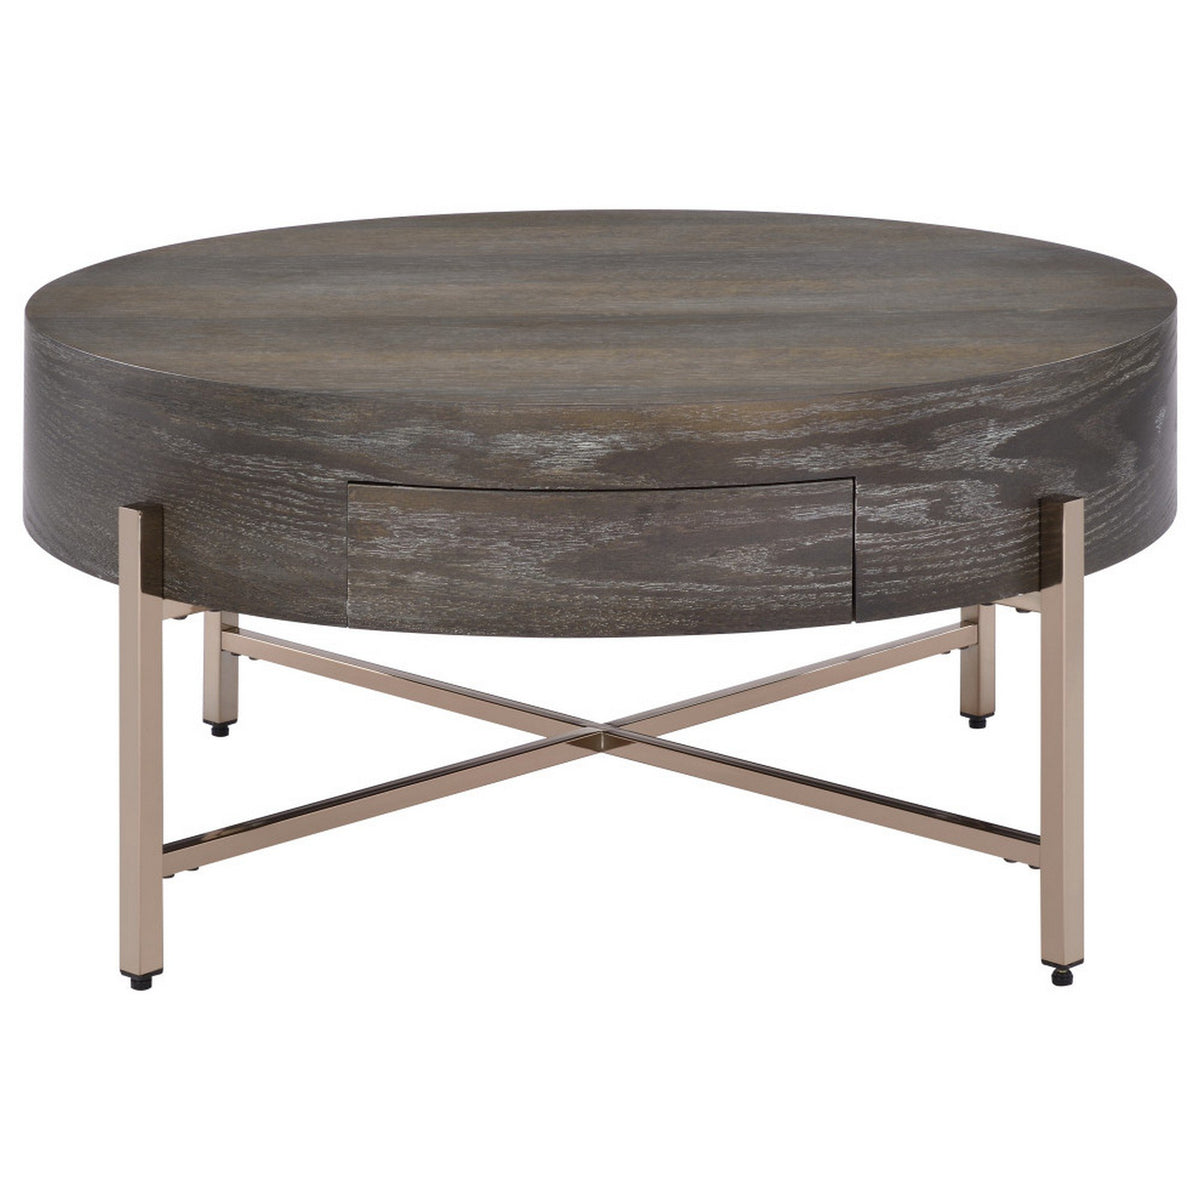 1 Drawer Round Modern Coffee Table with Crossed Metal Legs, Brown and Gold - BM215037